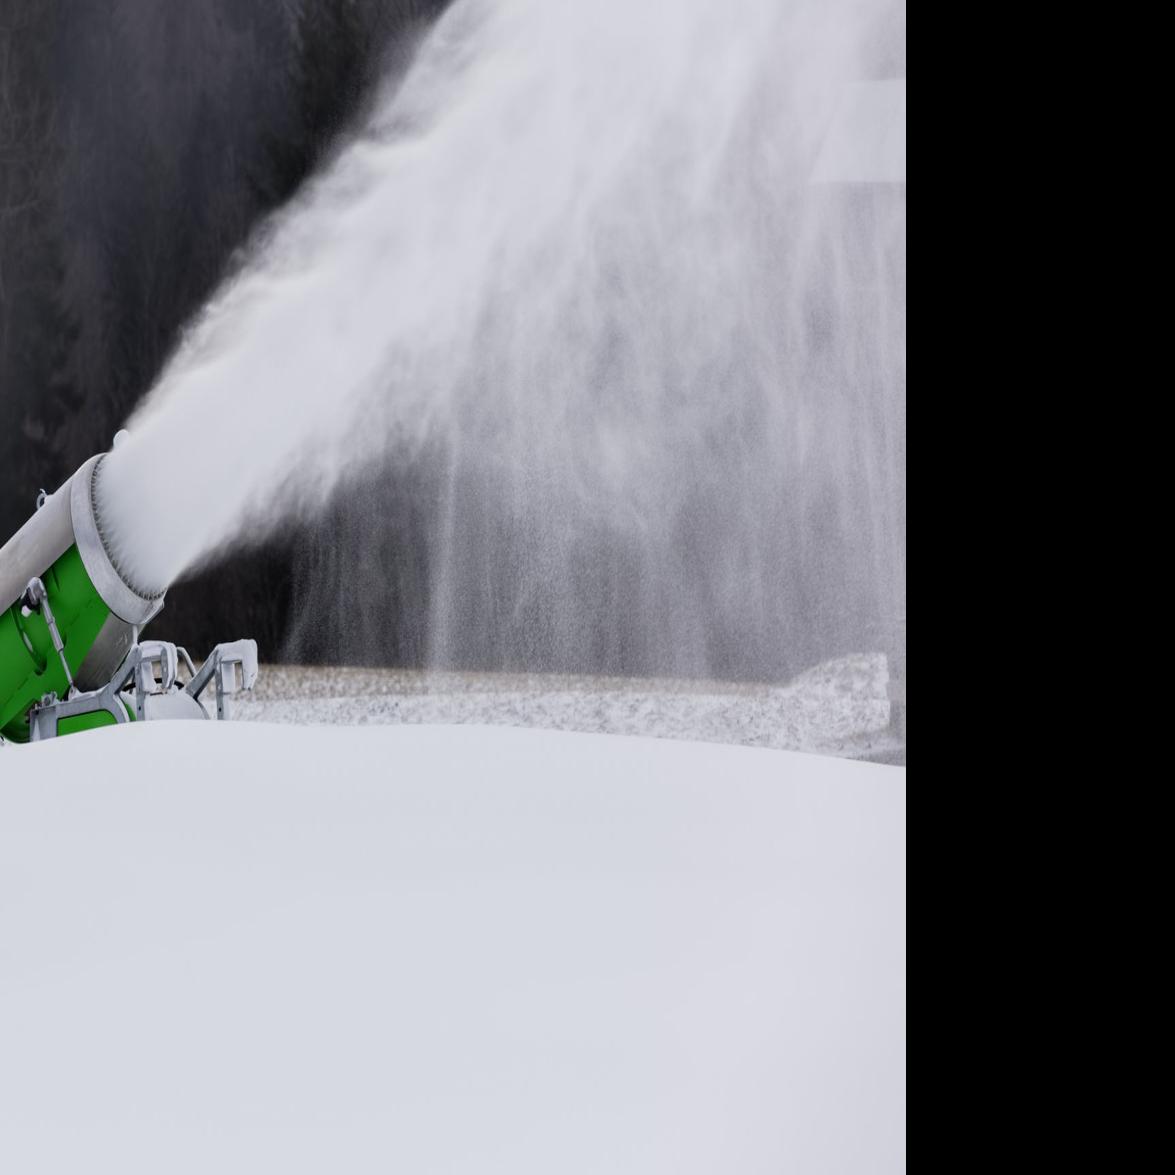 Snowmaking: How much Snow can a Snow Machine make? - Quora